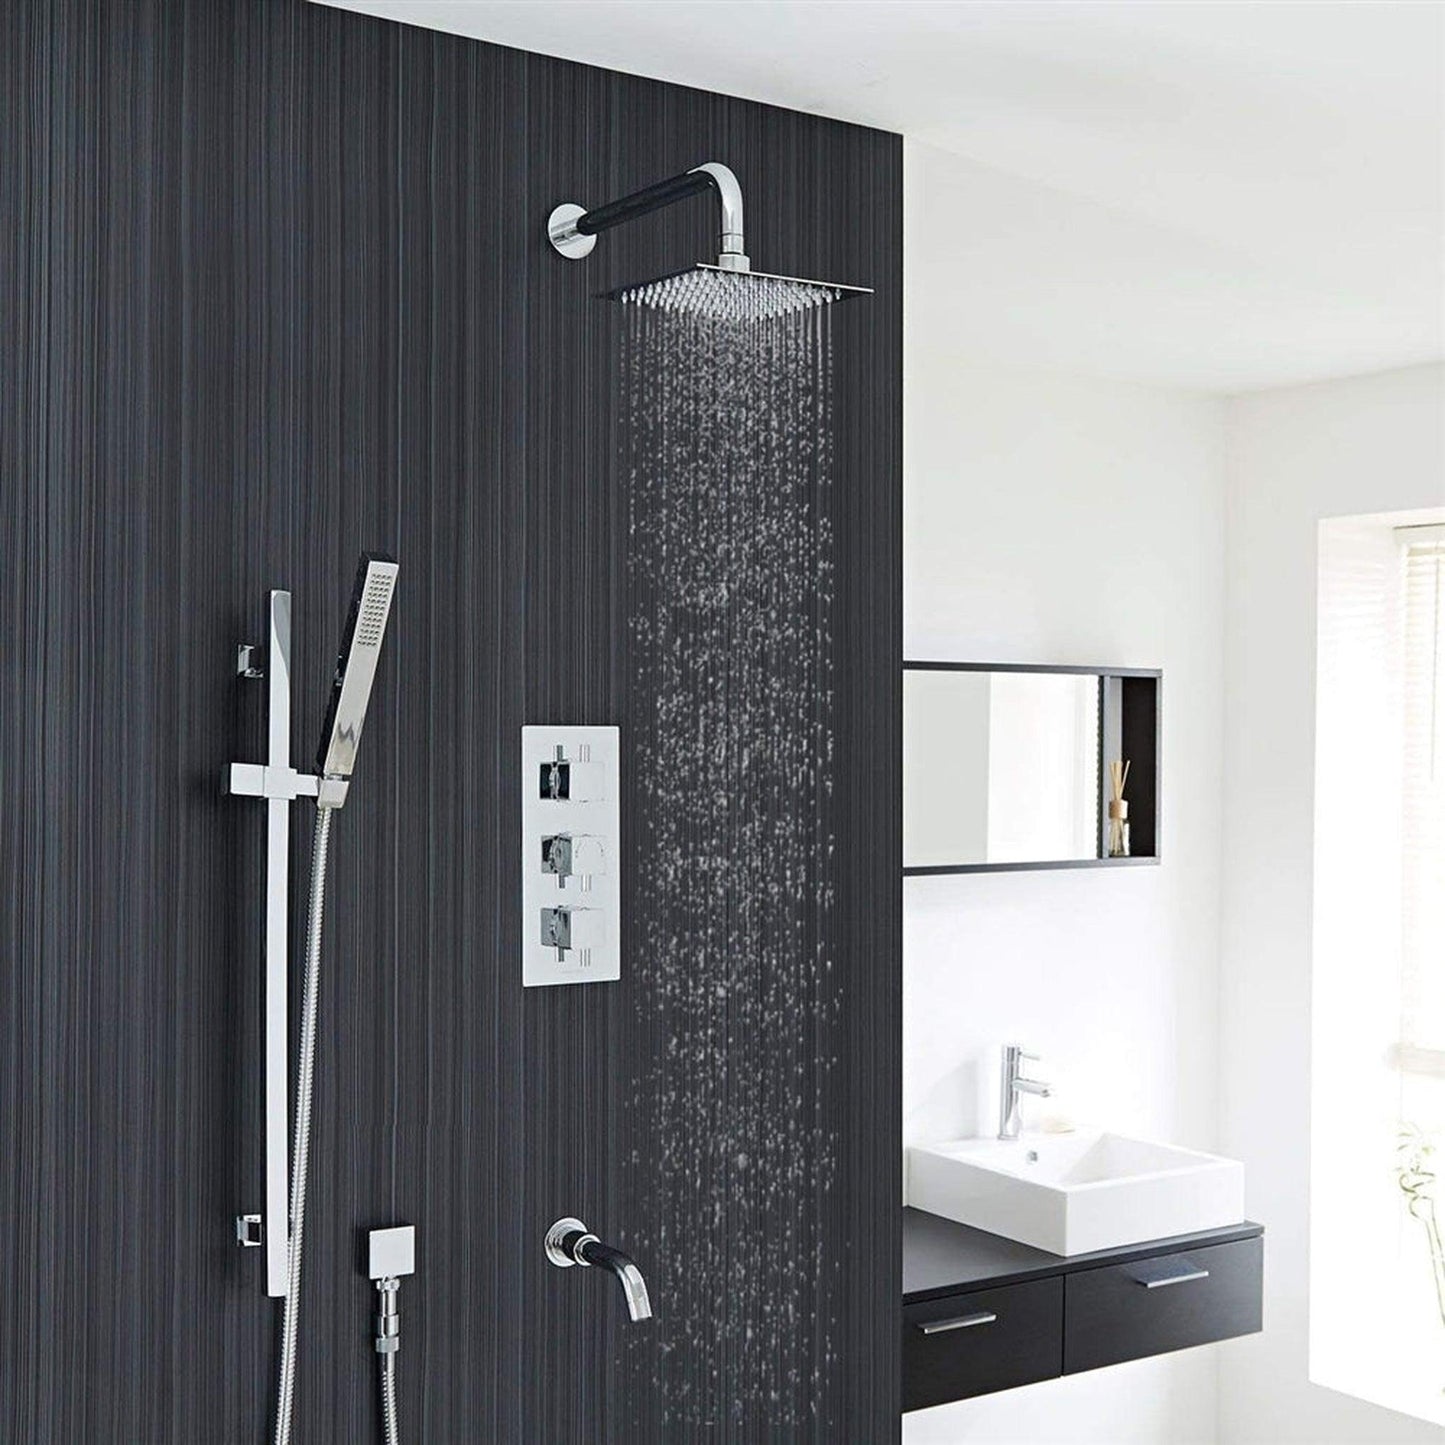 Fontana Liverpool Chrome 12" Wall-Mounted Thermostatic Rainfall Shower System With Water Power LED Lights and Hand Shower